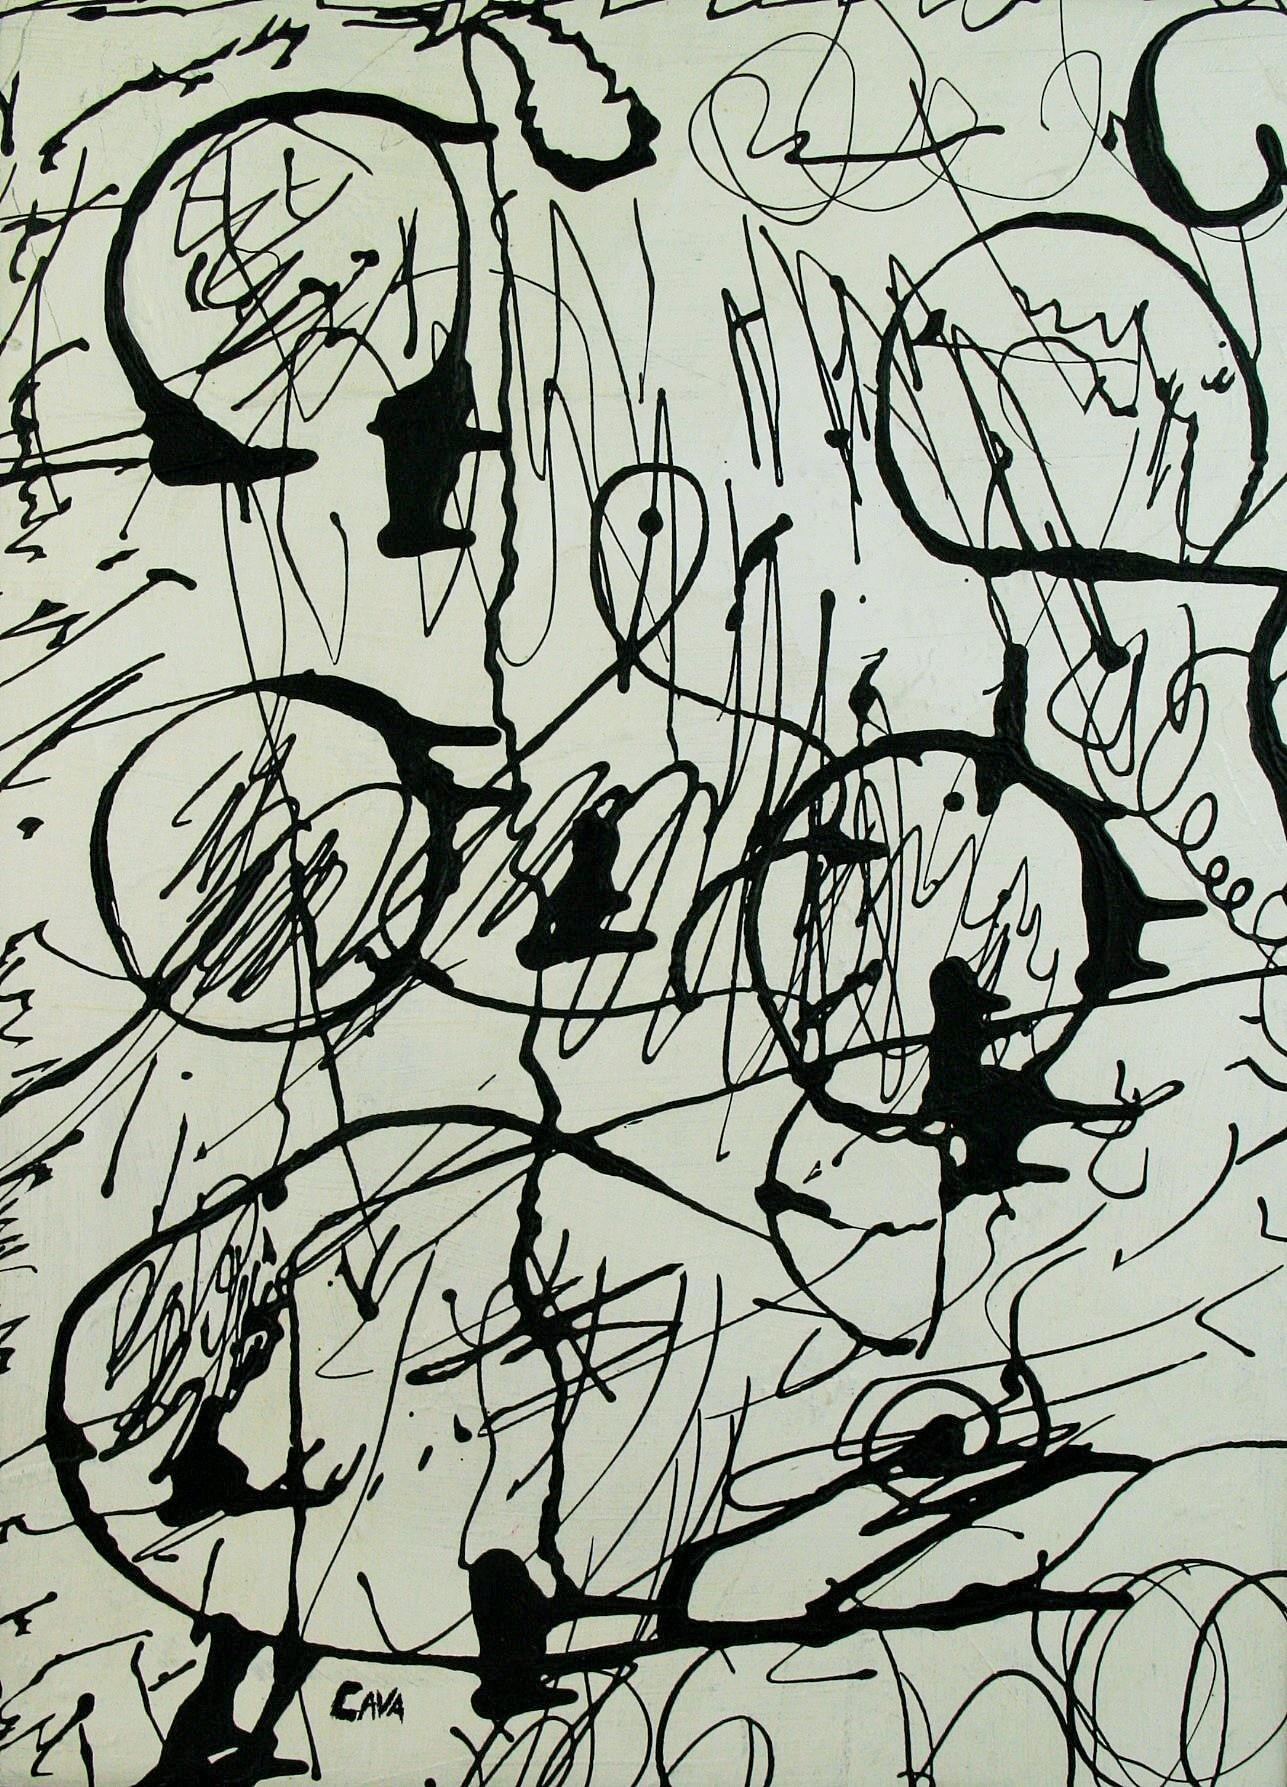 Abstract Black and White Circles - Painting by CAVA